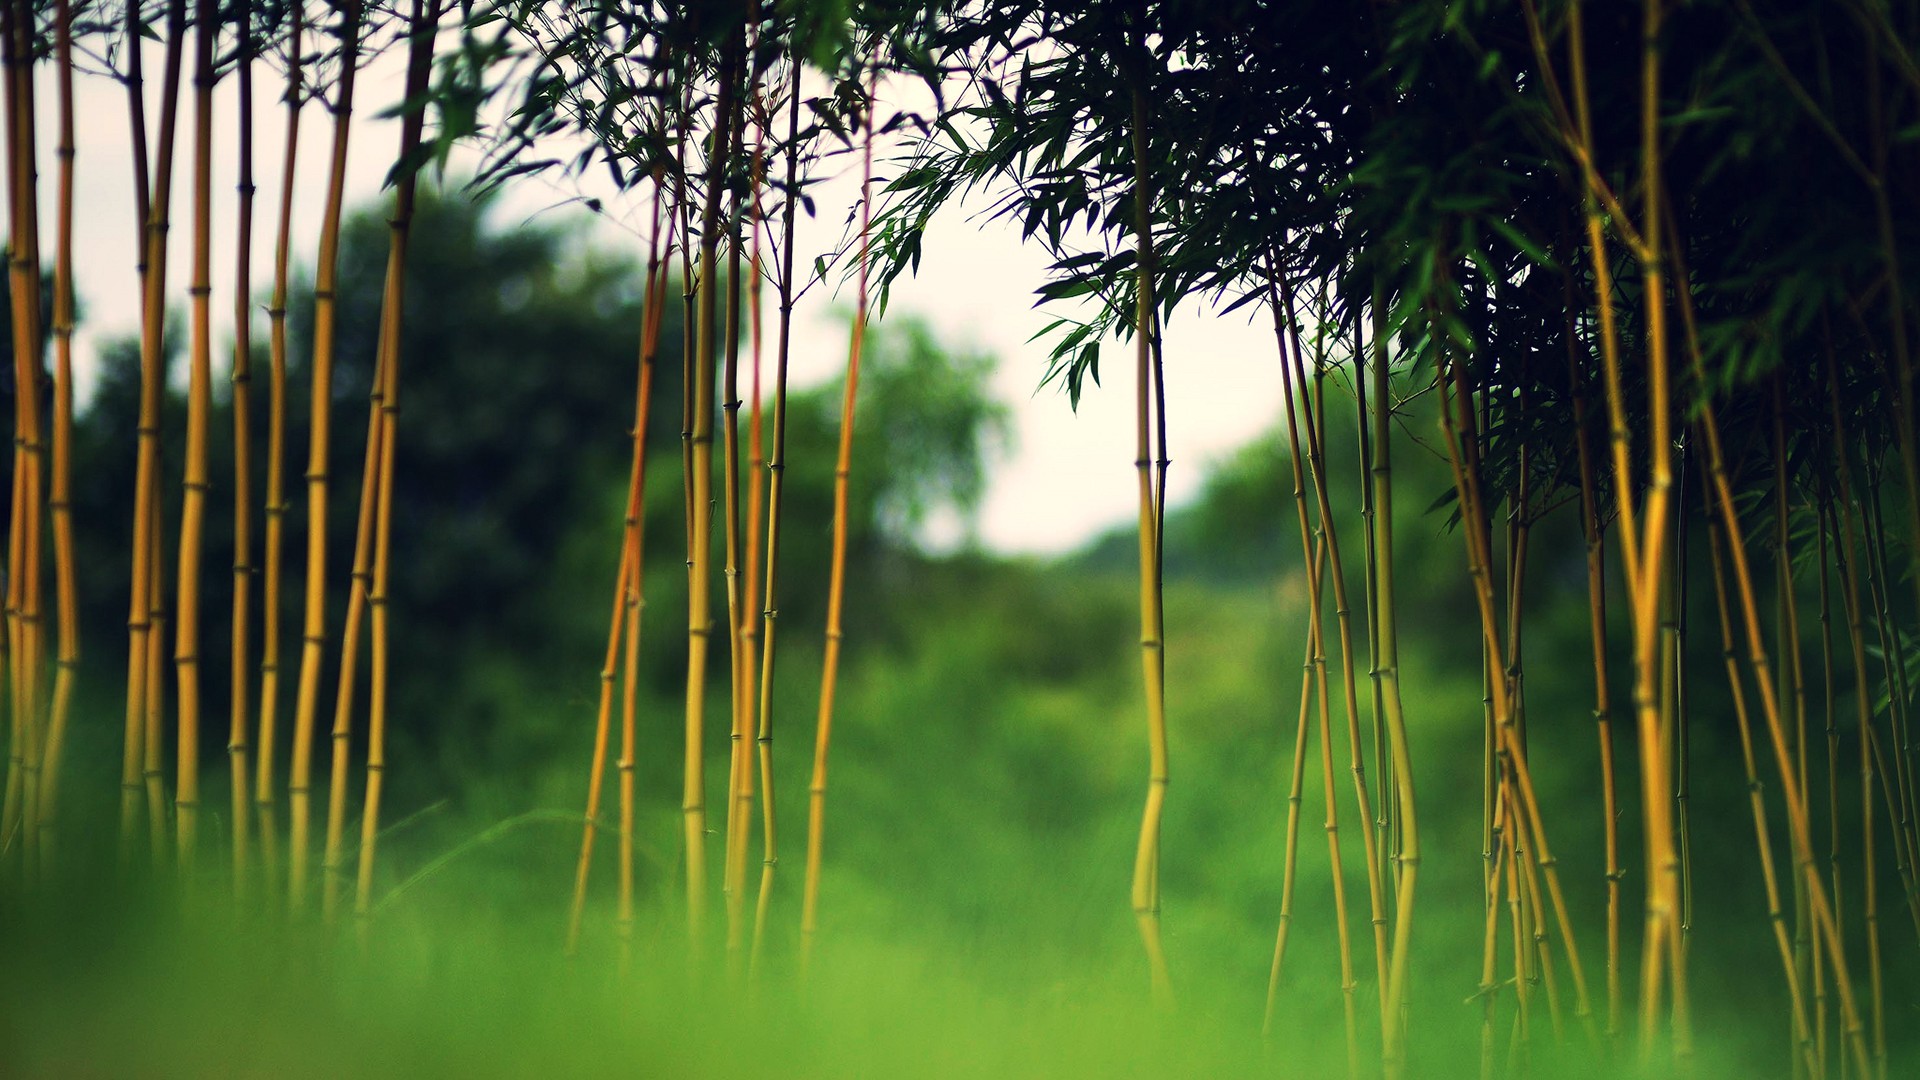 pictures of bamboo